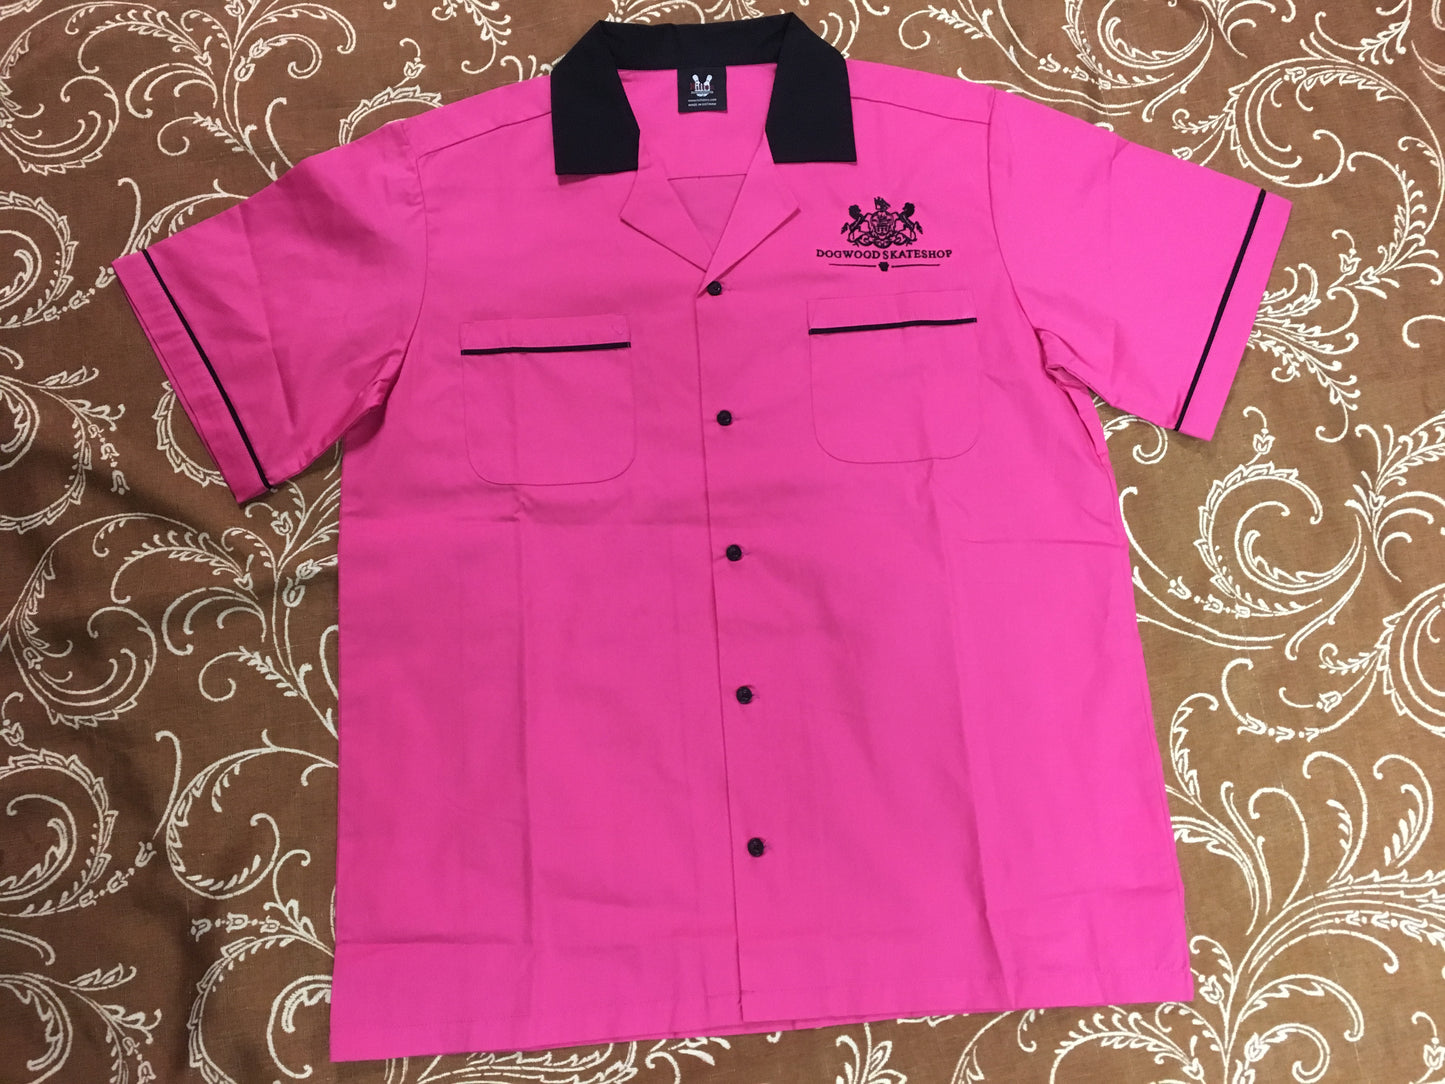 Bowling Team Horses S/S Button Down Tee Shirt Pink (size options listed)